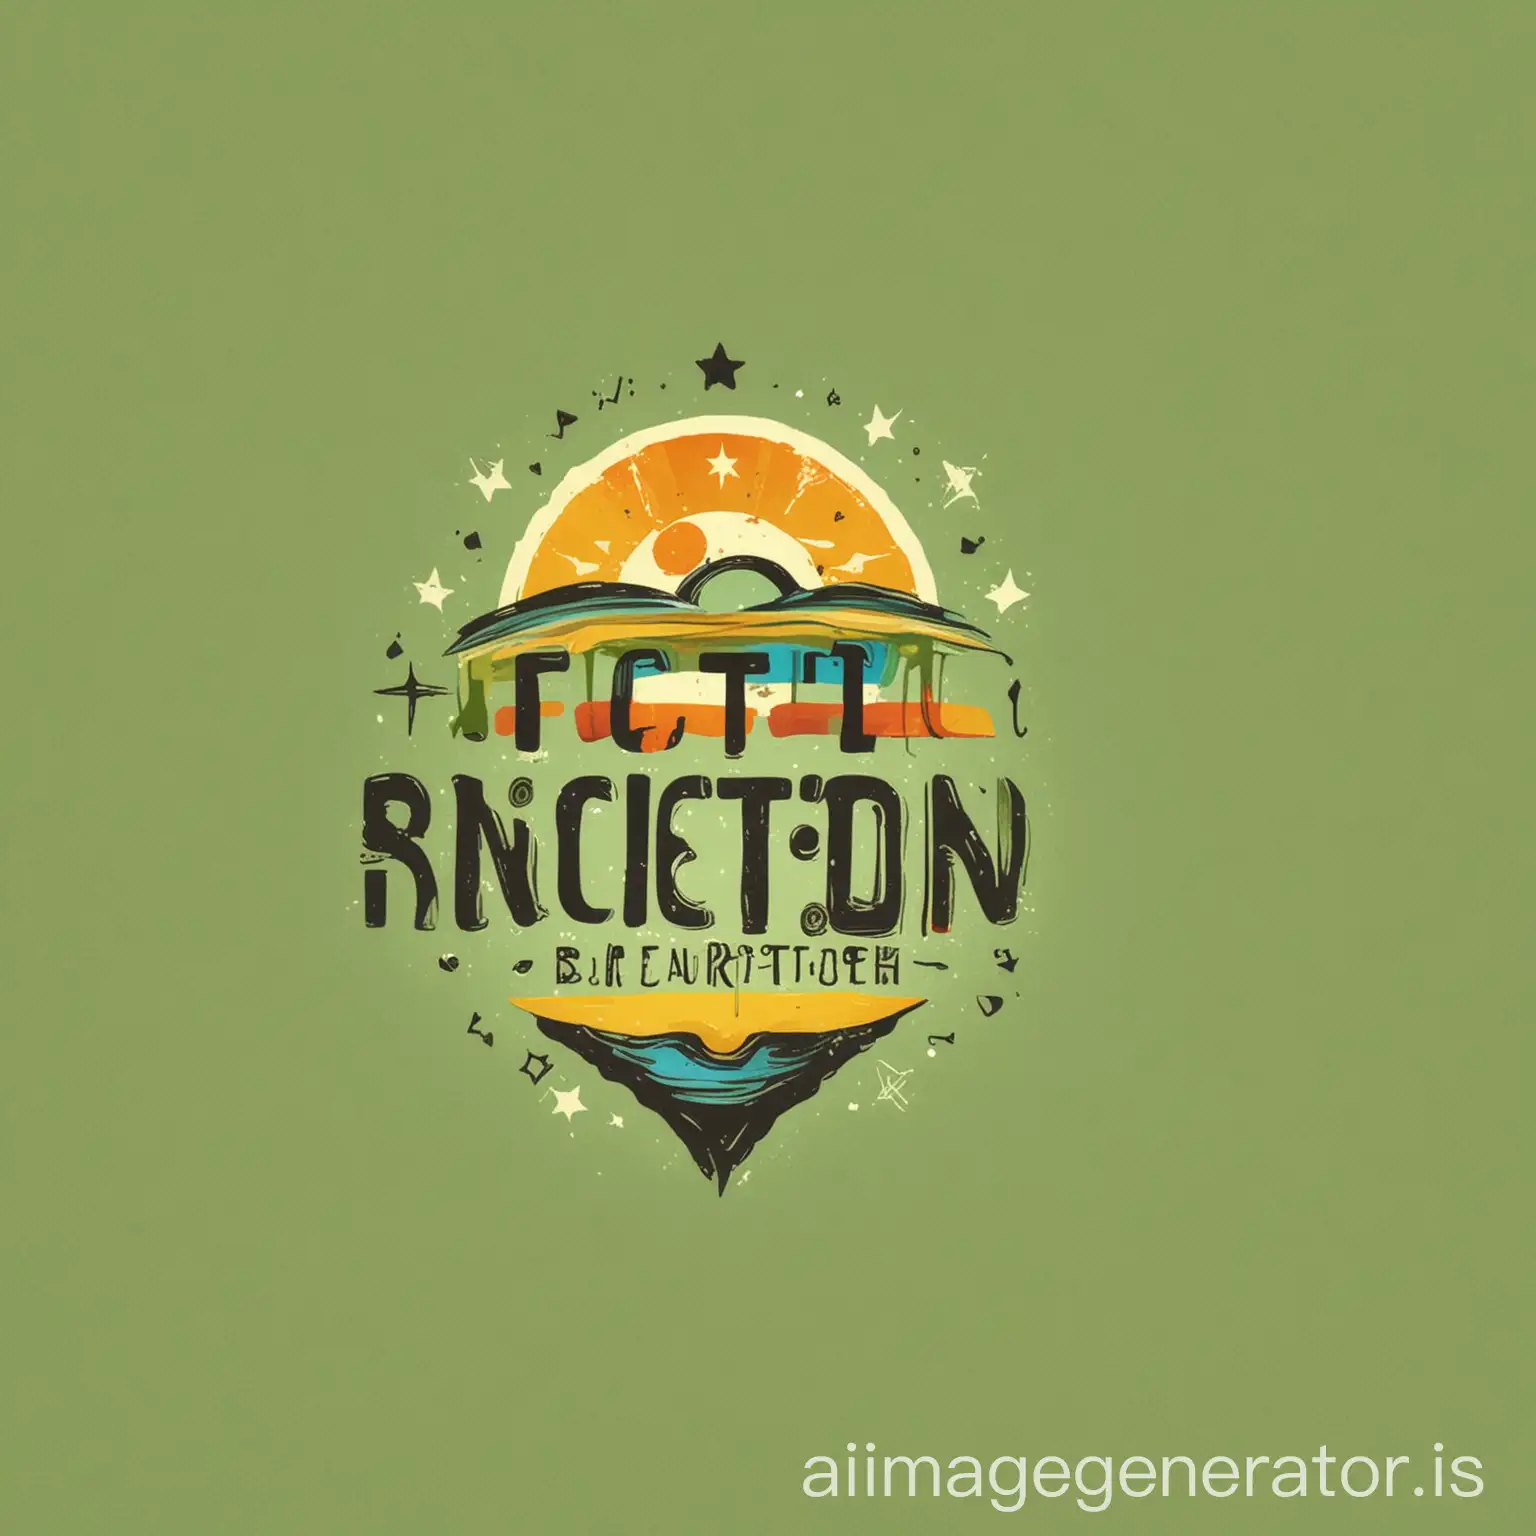 Cheerful-and-Fresh-Logo-Design-for-Fiction-Reification-Website